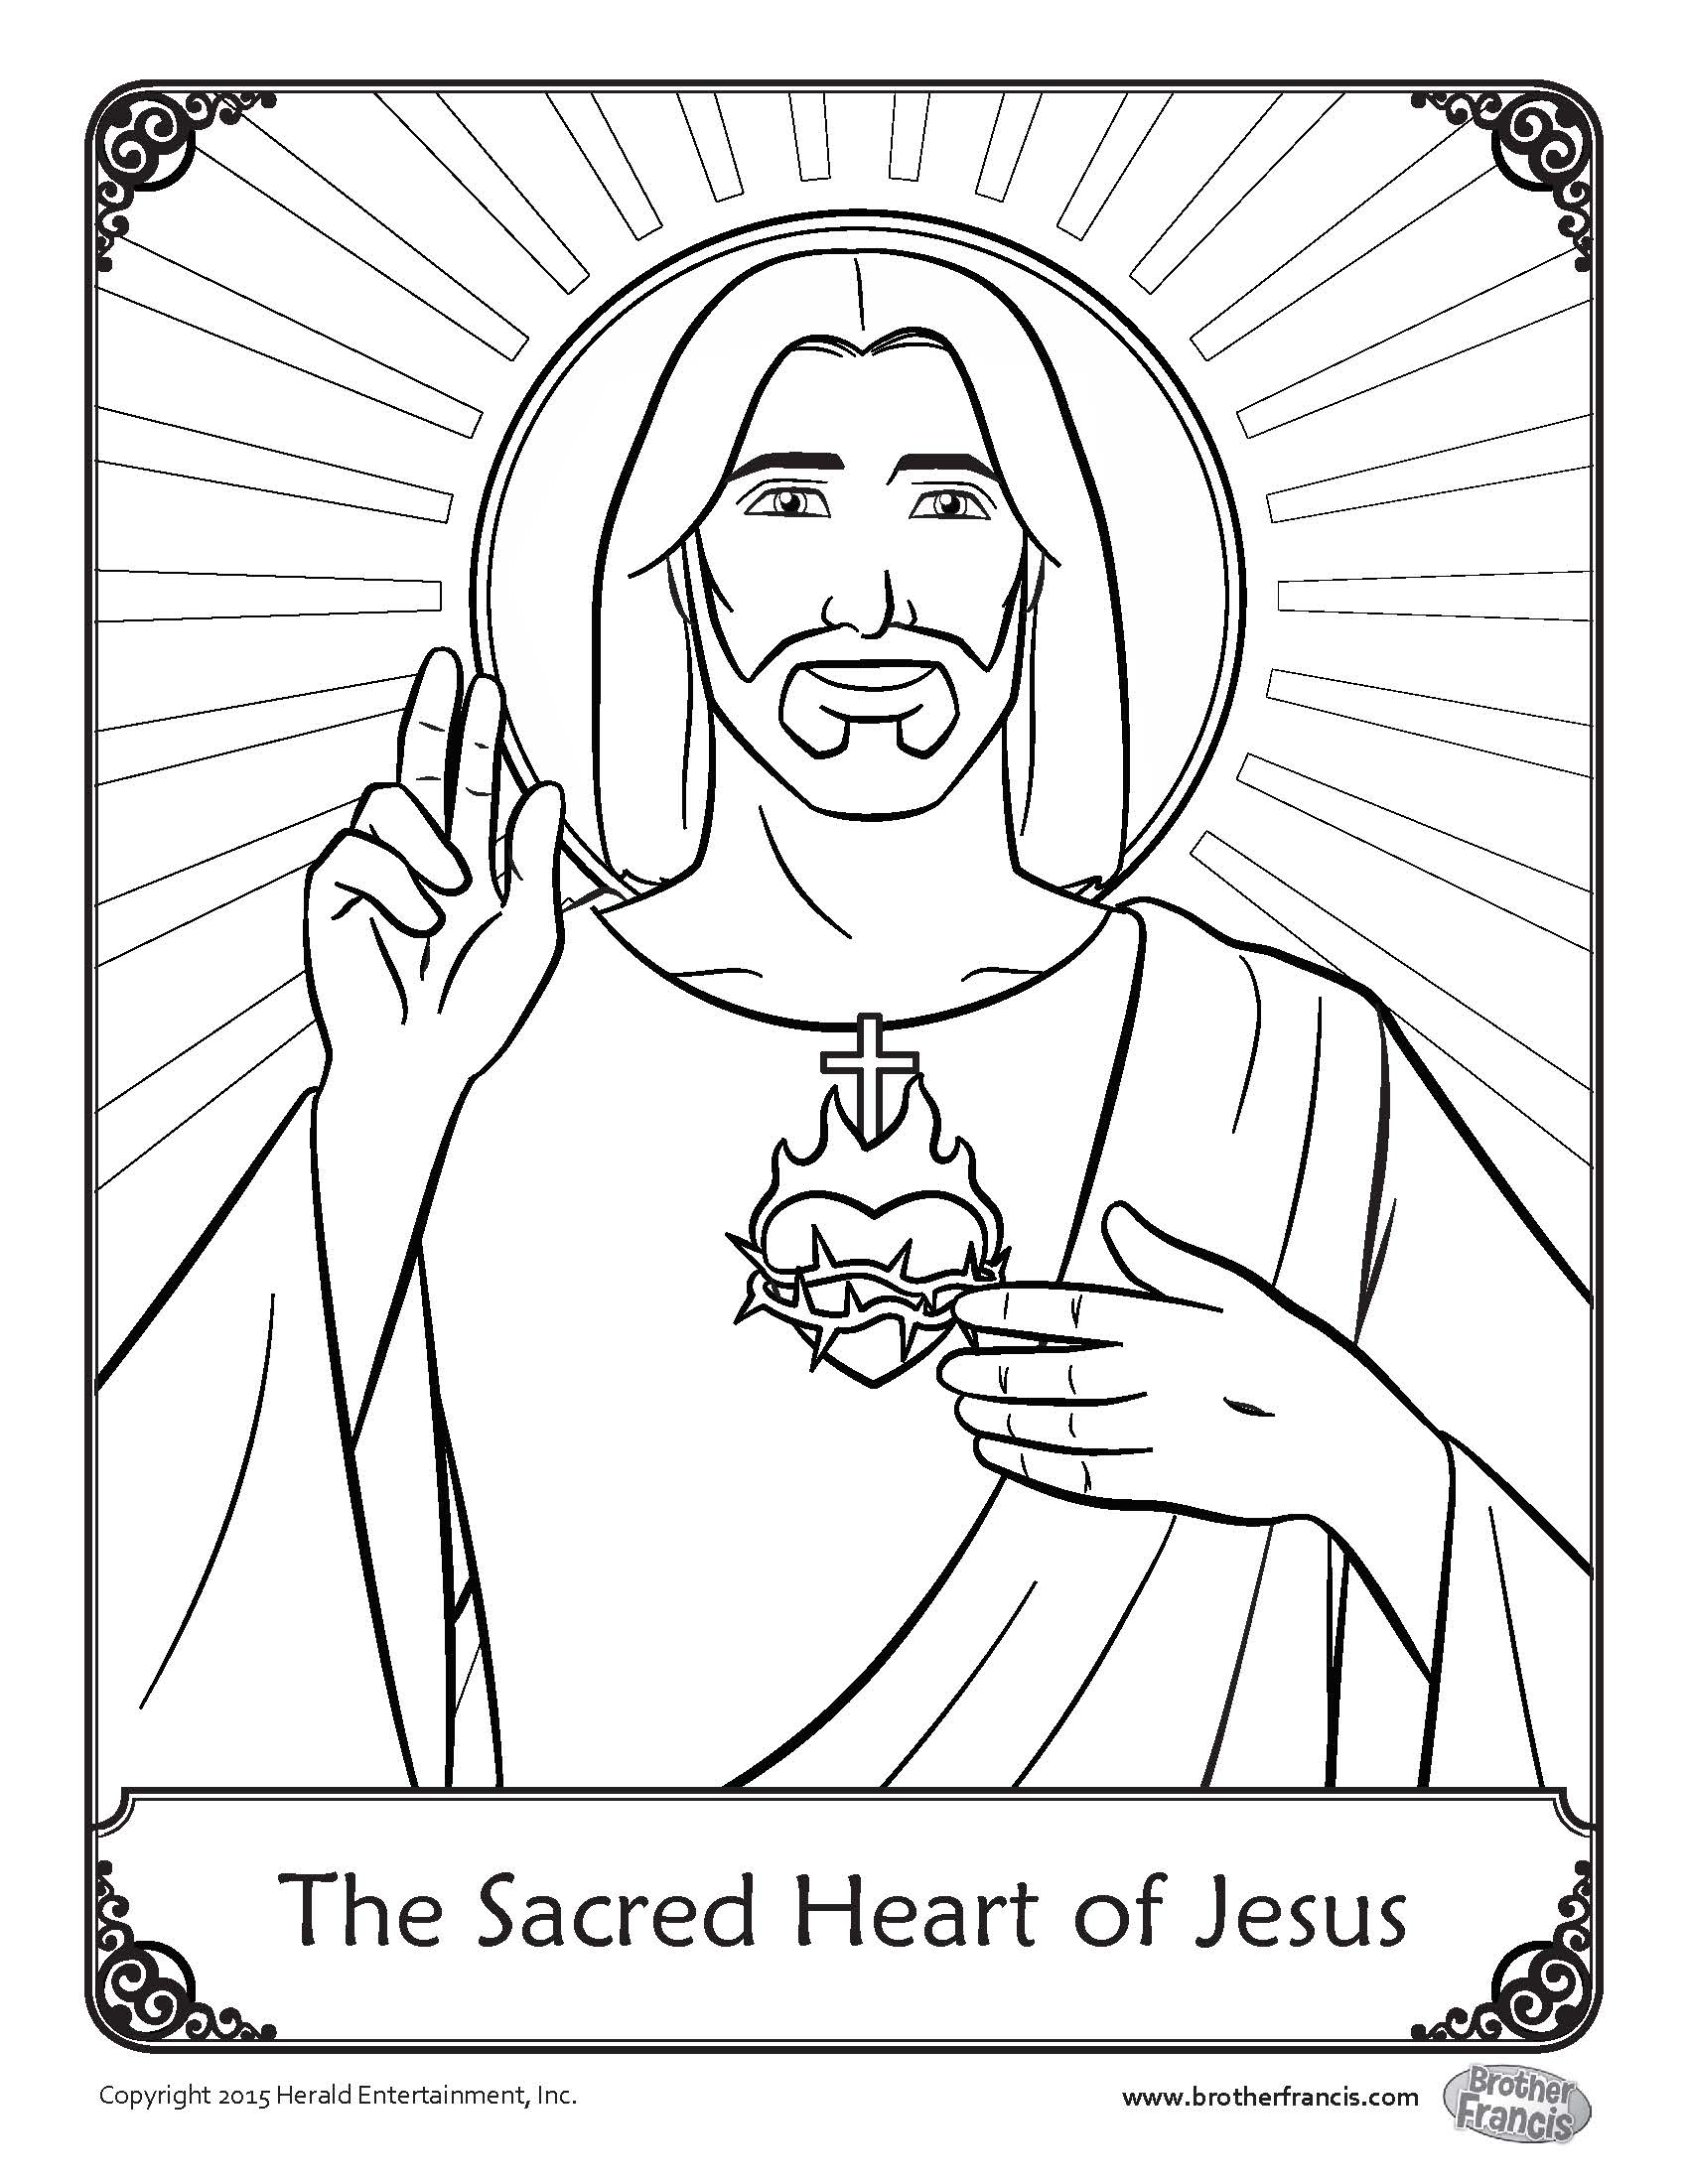 Download and Print - Sacred Heart of Jesus Coloring Page